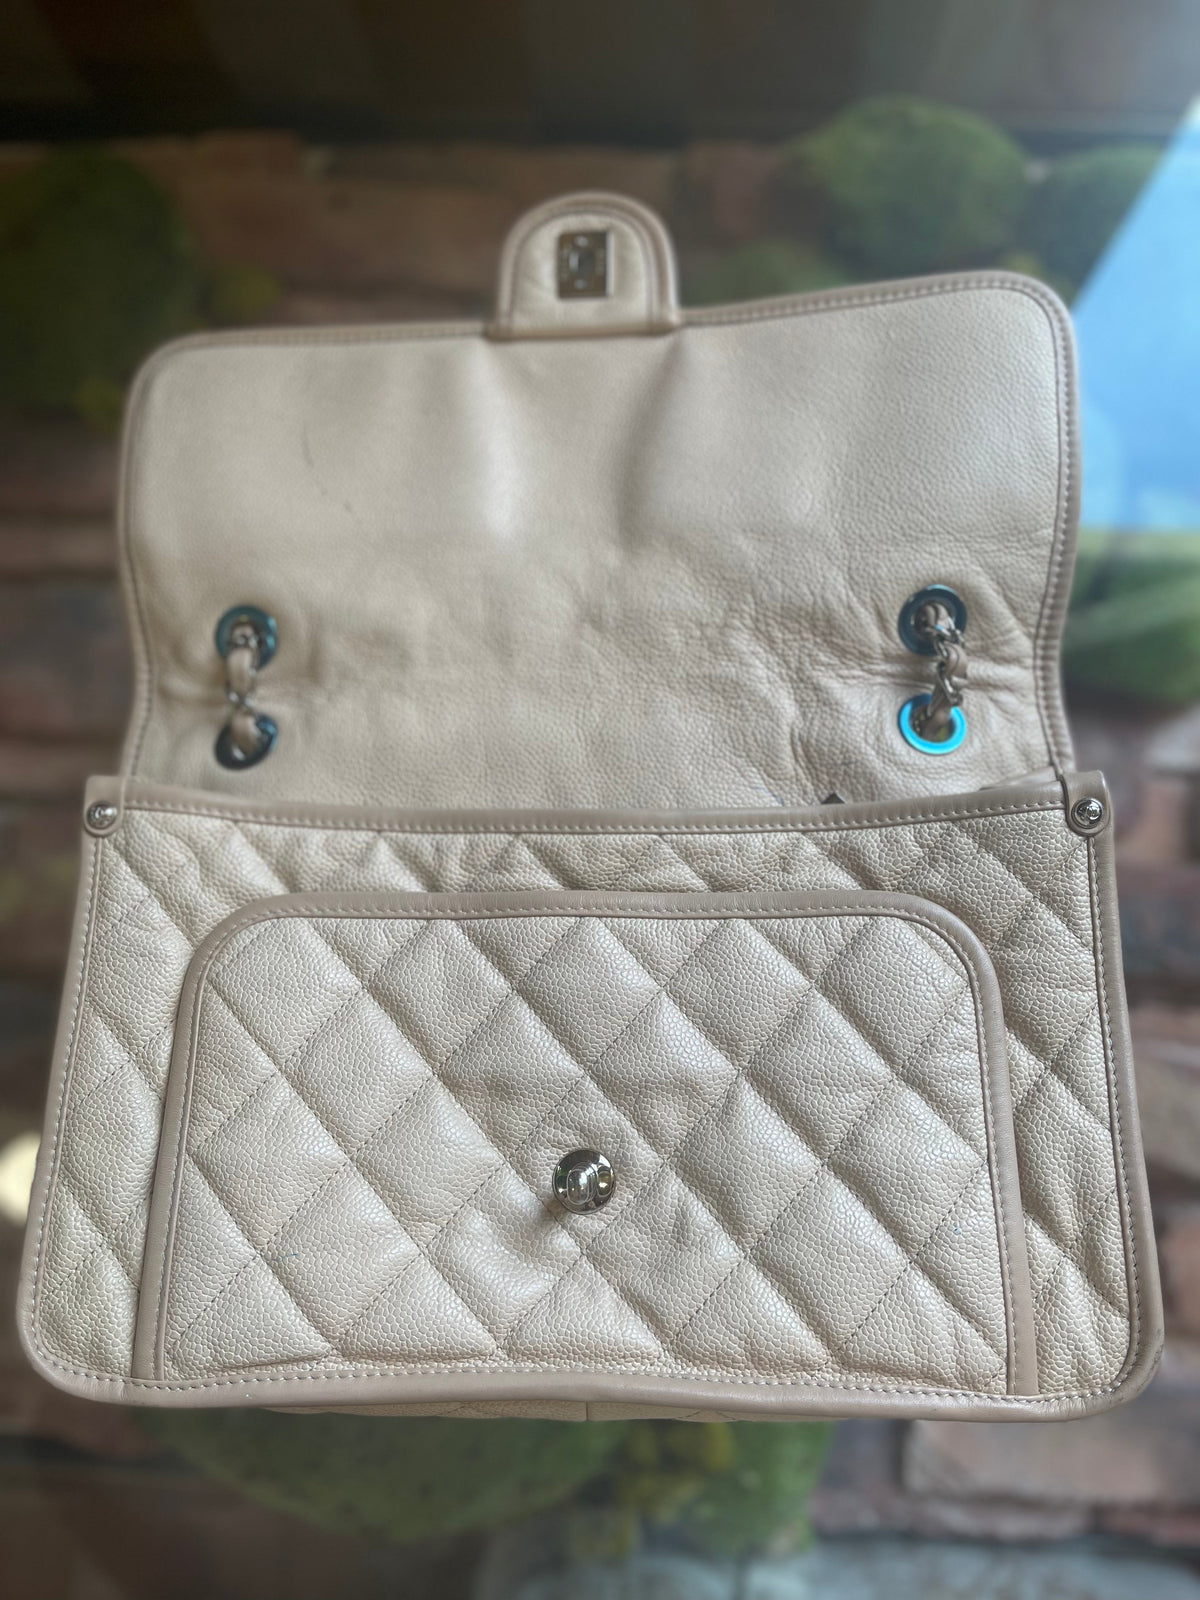 Chanel French Riviera Beige Flap